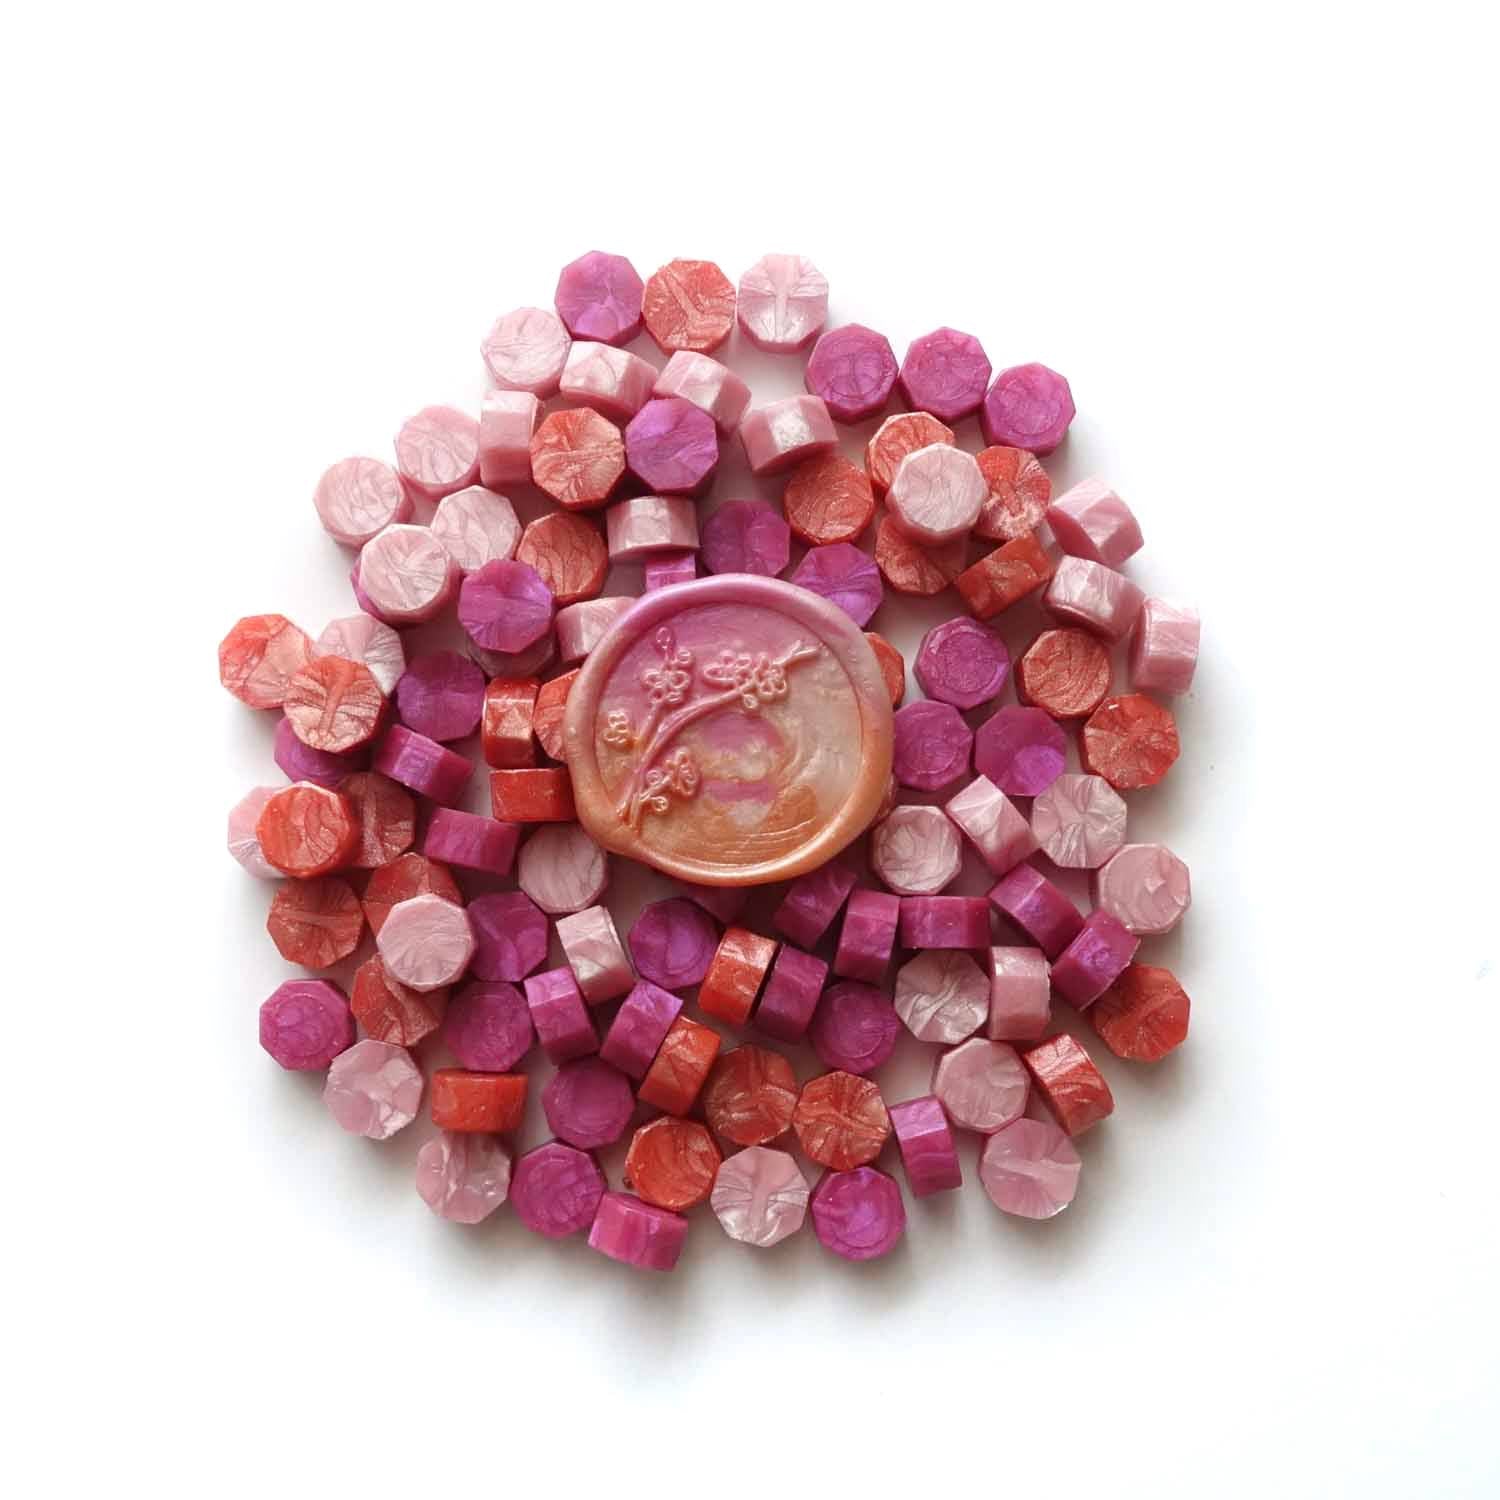 Cherry blossom wax seal with coral pink and fuchsia sealing wax granules Fiona Ariva